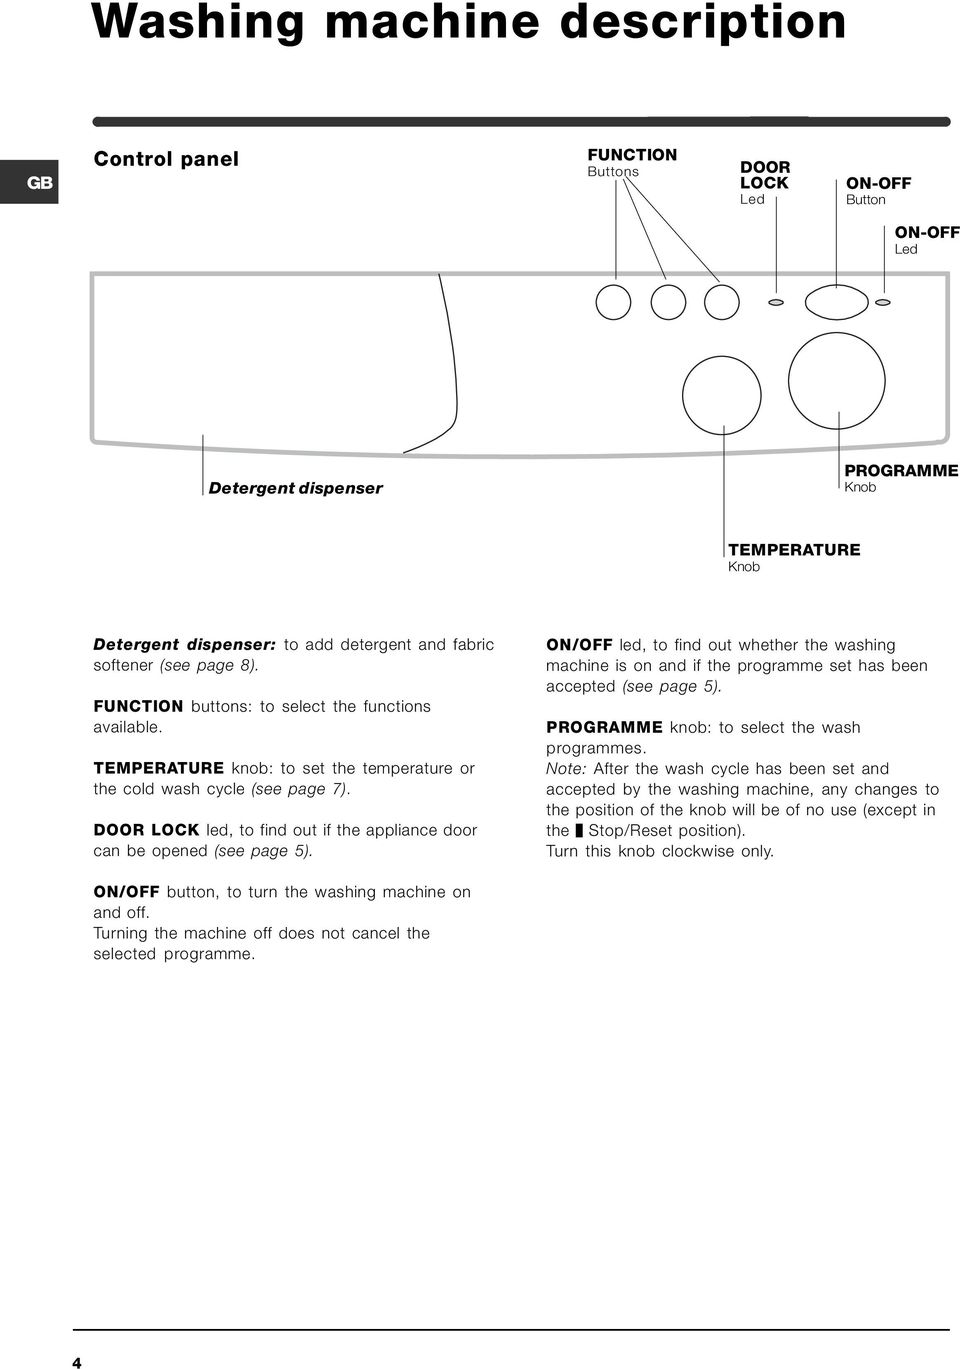 DOOR LOCK led, to find out if the appliance door can be opened (see page 5). ON/OFF led, to find out whether the washing machine is on and if the programme set has been accepted (see page 5).